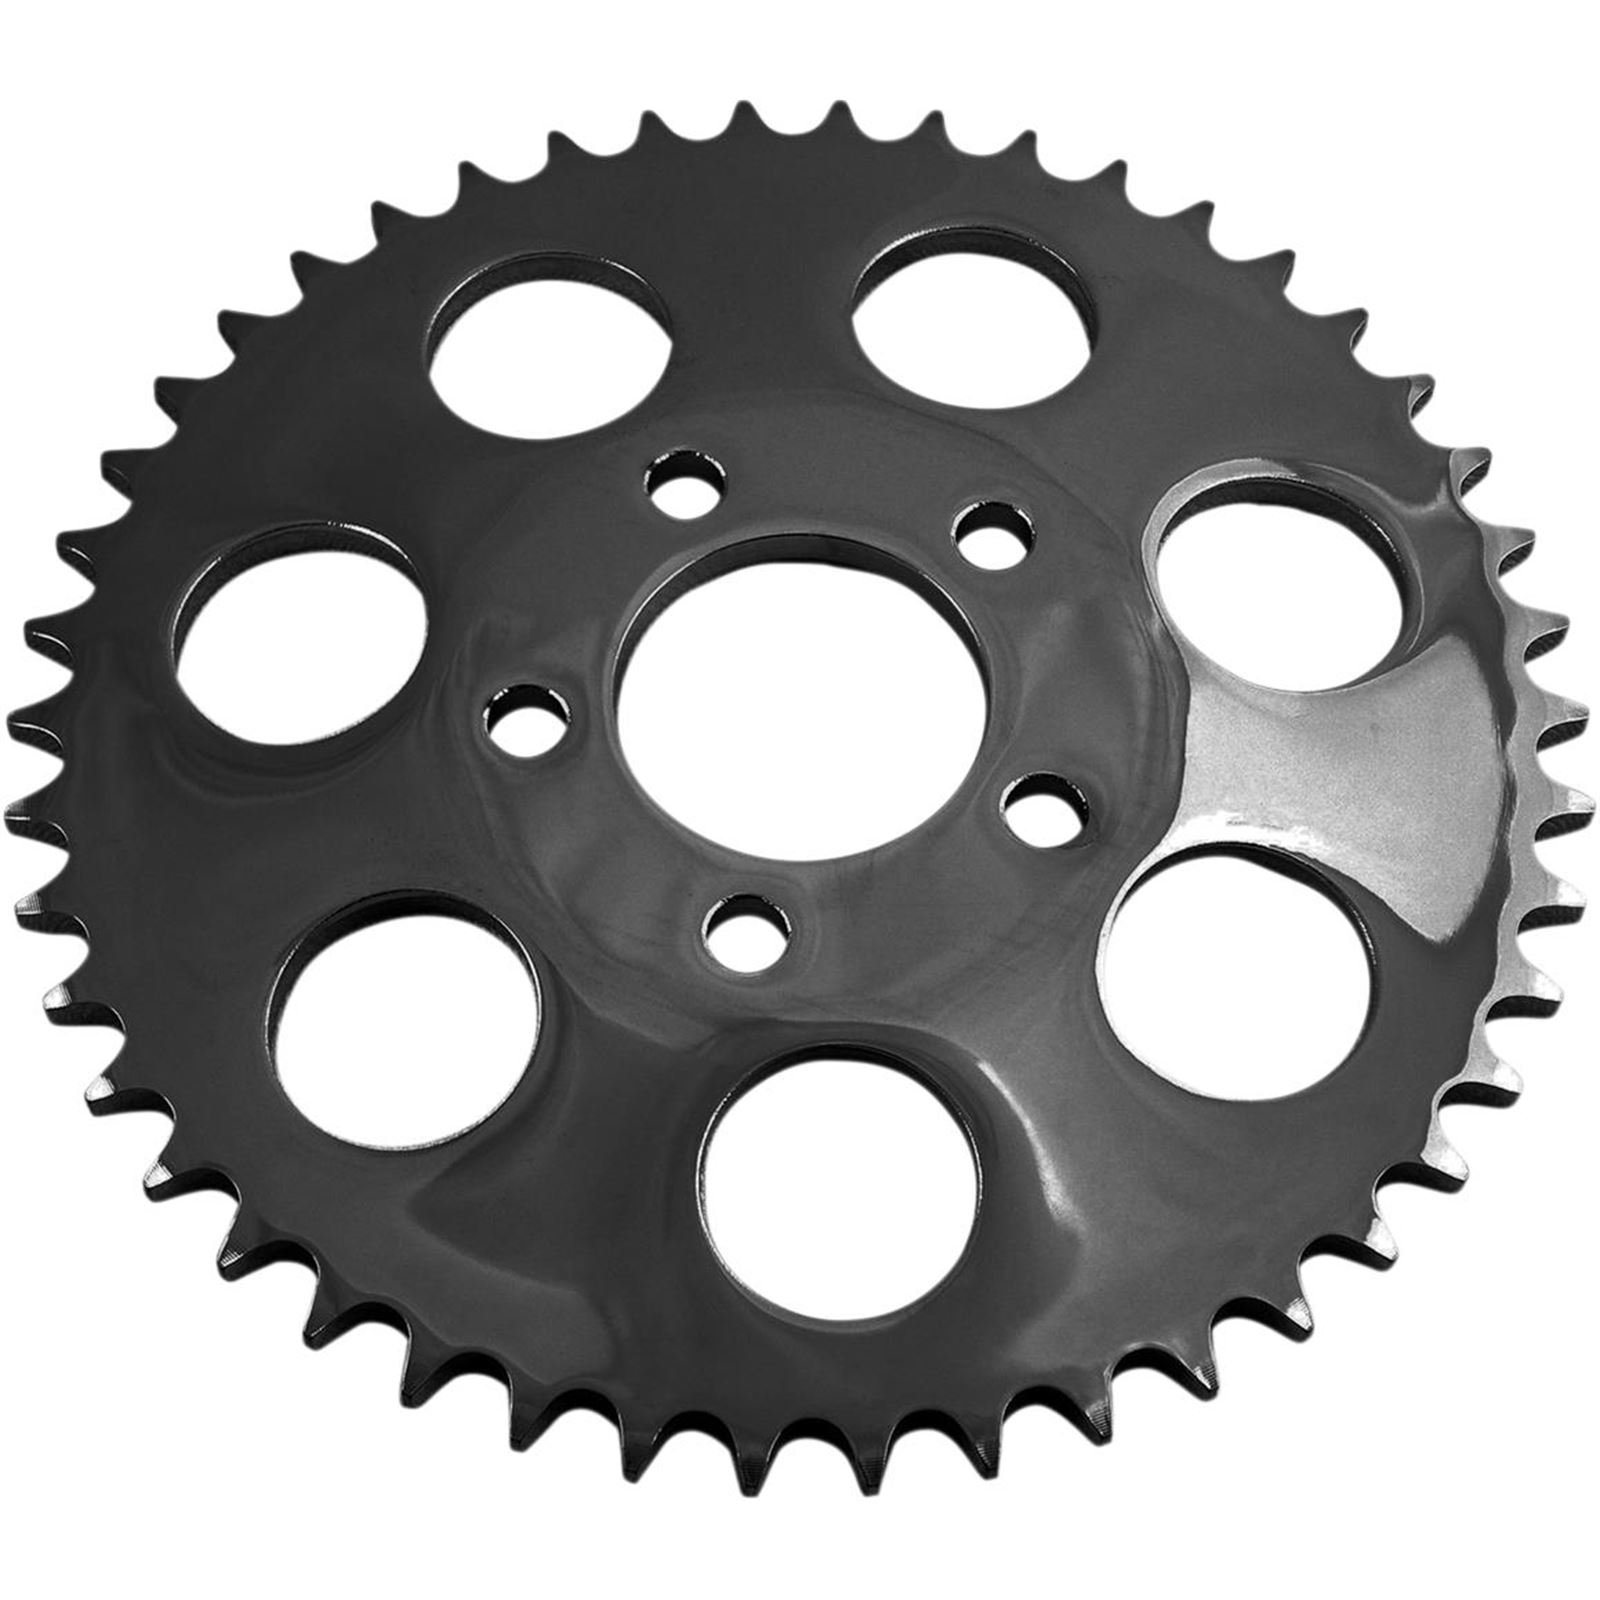 Drag Specialties Rear Sprocket - Gloss Black - Dished - 51-Tooth